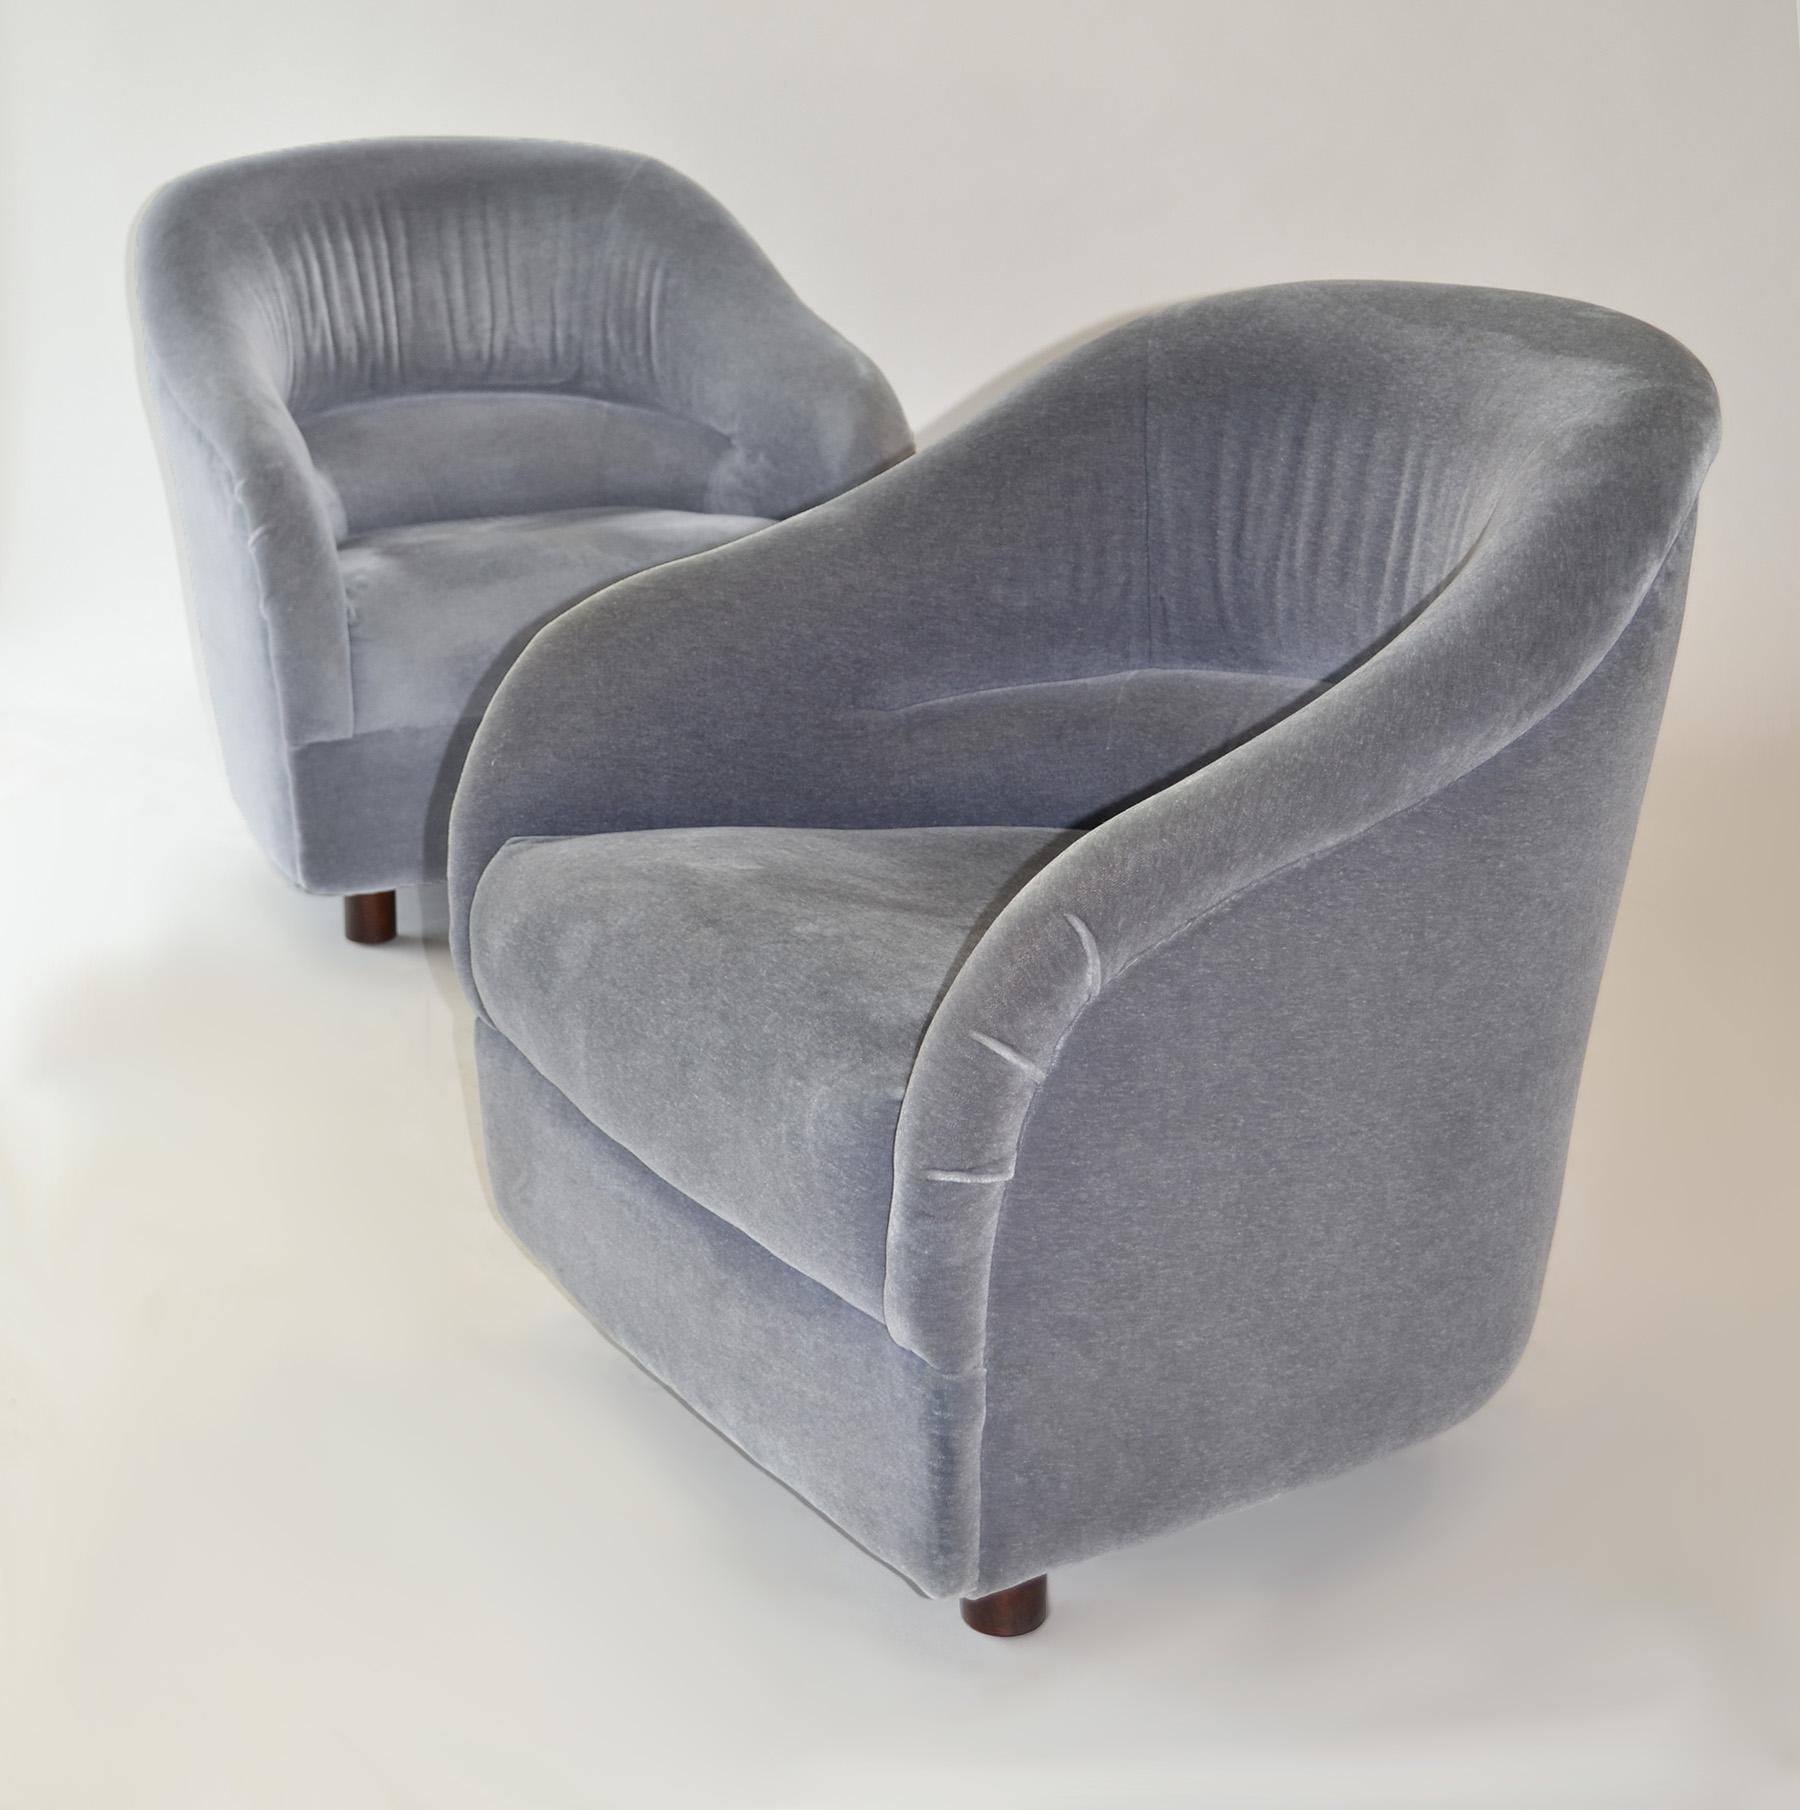 Pair of Signed Ward Bennett for Brickell Assoc Tub Lounge Chairs in Gray Mohair
Pair of signed tub or barrel lounge chairs by Ward Bennett for Brickell Assoc. in gray mohair.
Comfortable, mid-century, on wooden legs, sleek style tapered barrel form